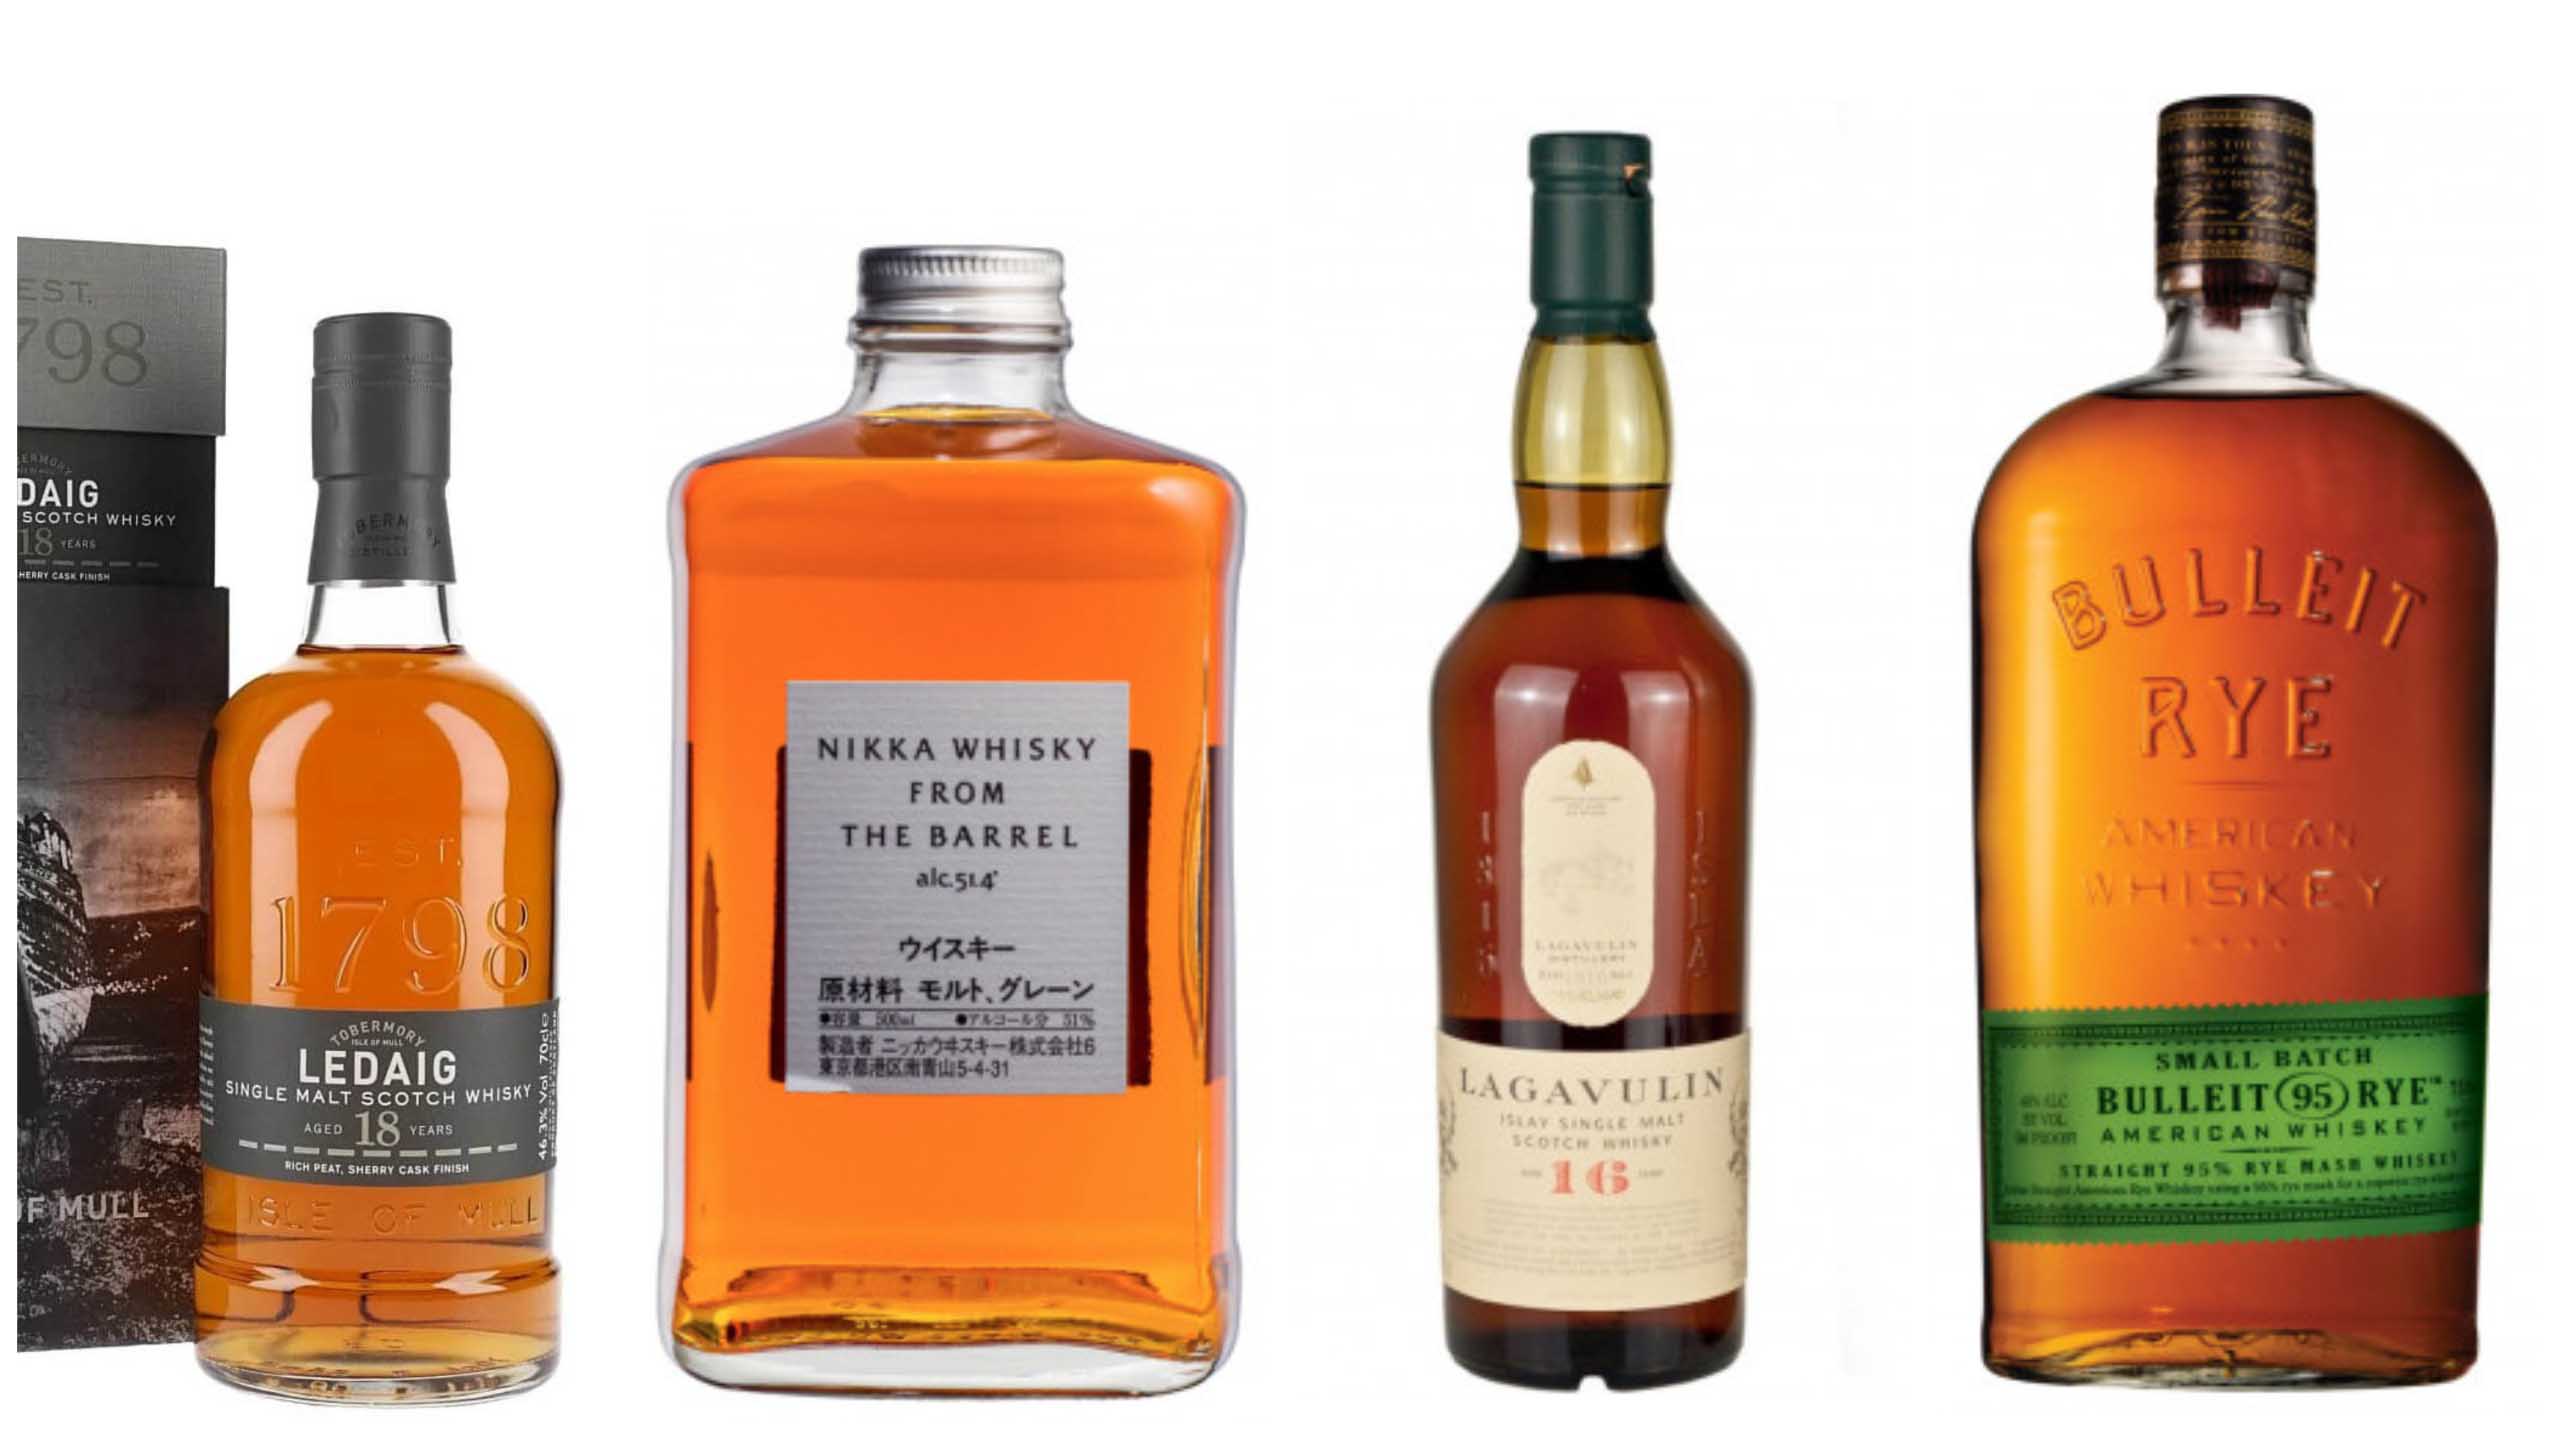 8 New Single Malt Scotch Whiskies to Try Right Now